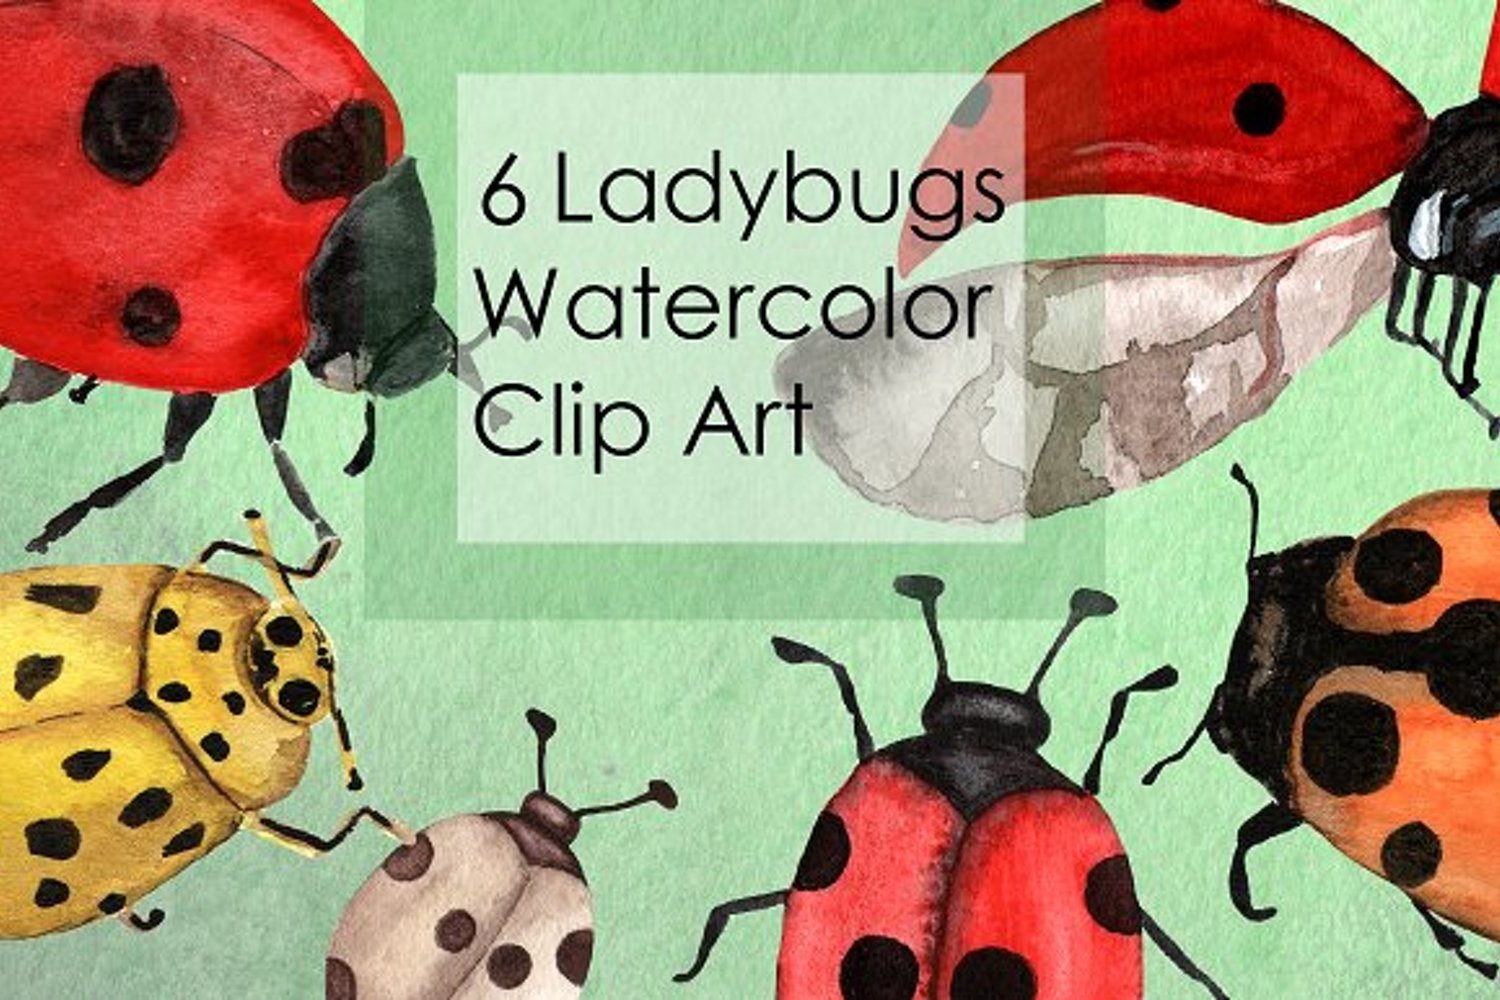 Cover image of Watercolor Ladybugs Clip Art.